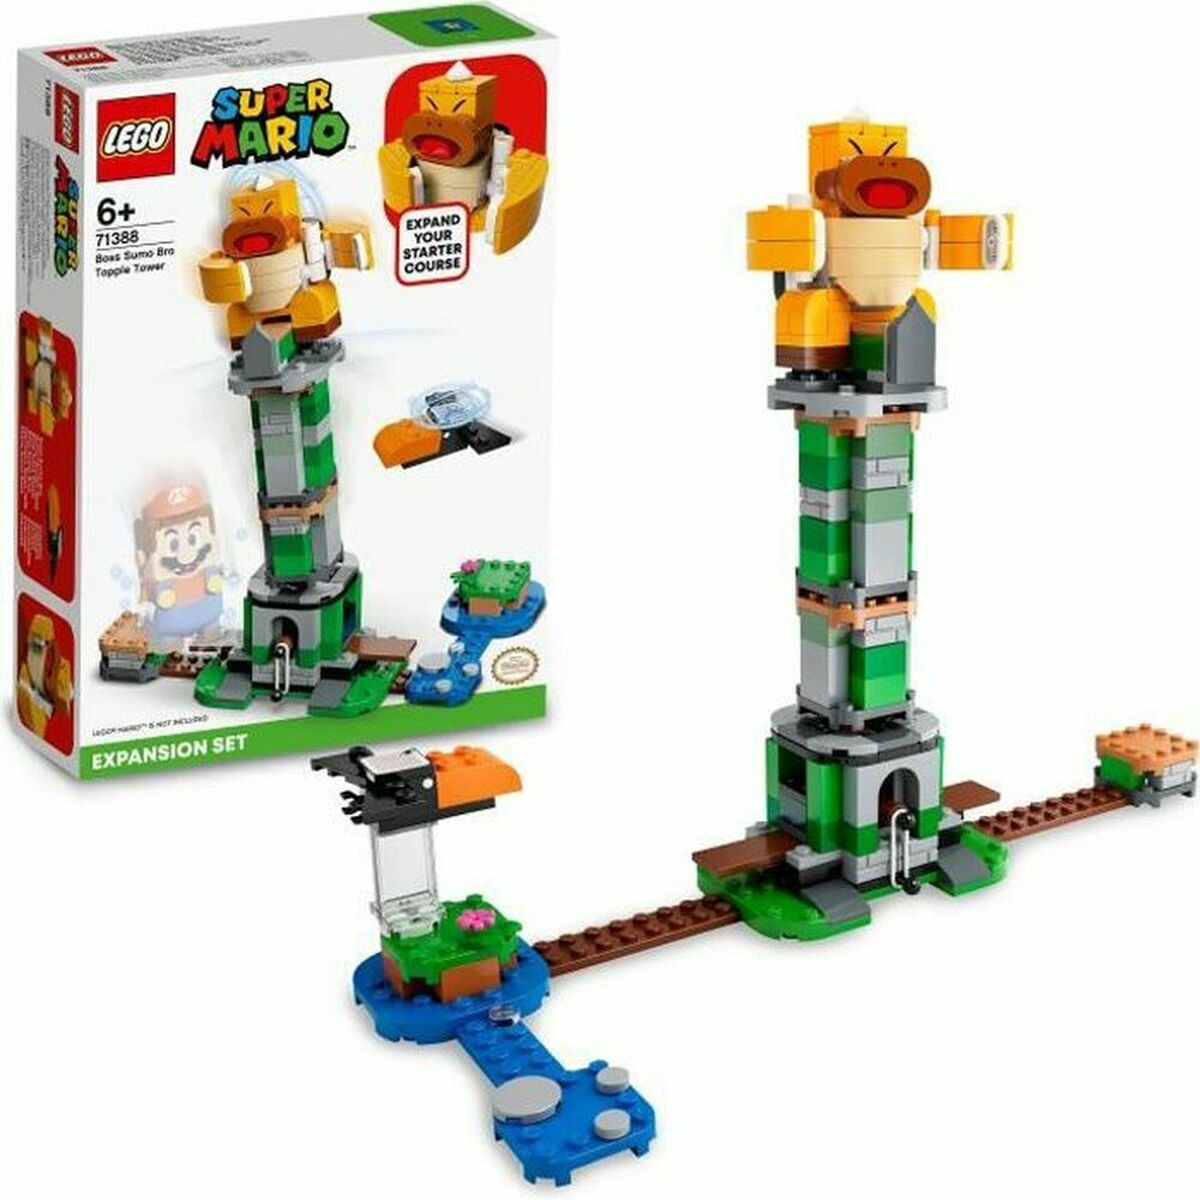 Playset Lego 71388 Super Mario Boss Frere Sumo's Infernal Tower Expansion